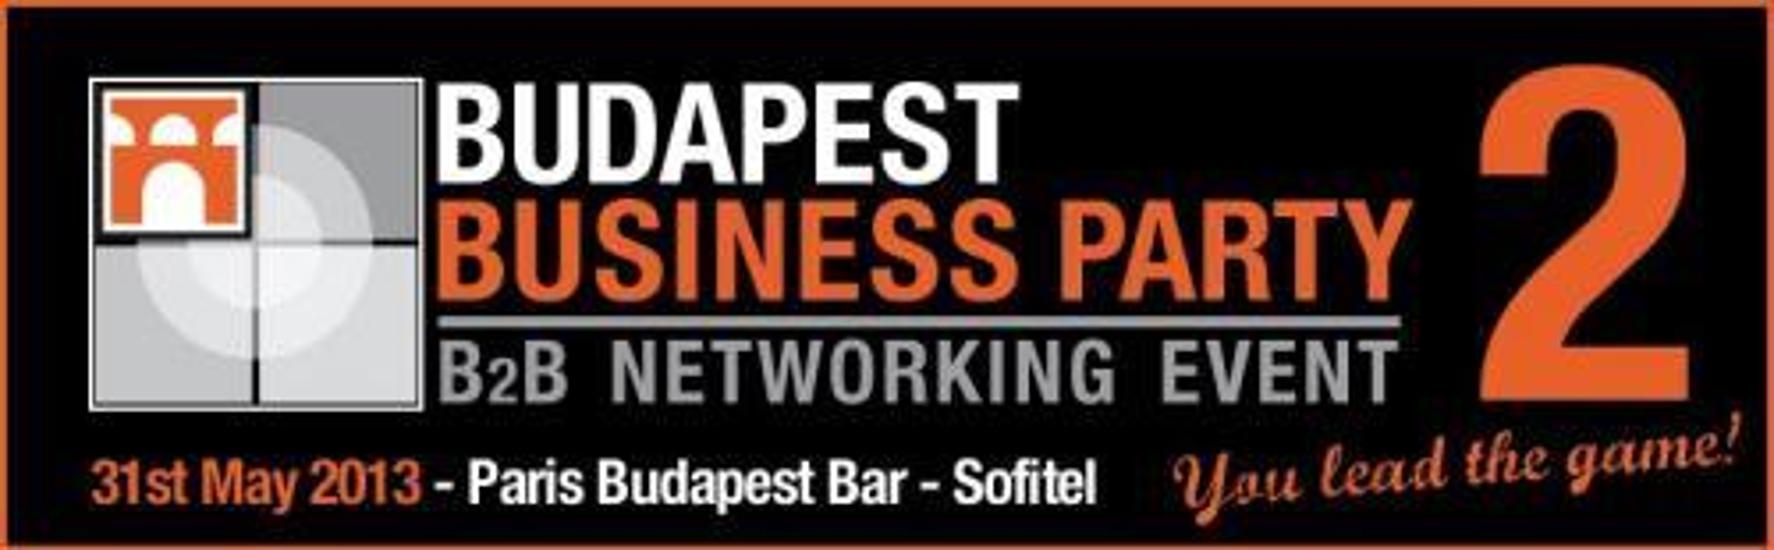 Registration Closed: Budapest Business Party 2, Sofital Budapest, 31 May